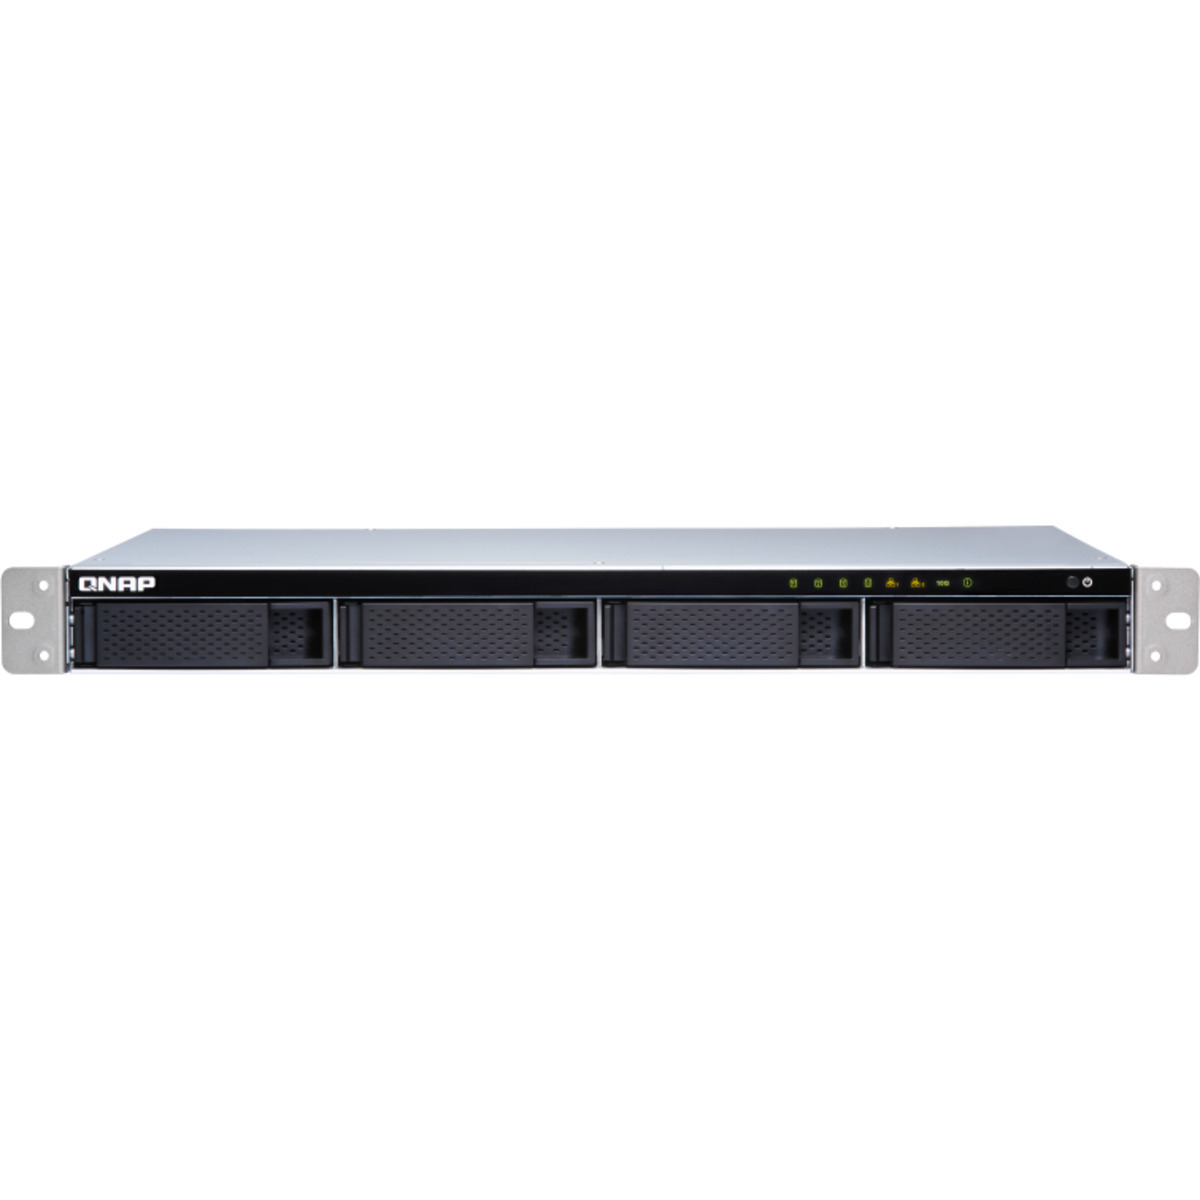 QNAP TS-431XeU 32tb 4-Bay RackMount Multimedia / Power User / Business NAS - Network Attached Storage Device 4x8tb Seagate EXOS 7E10 ST8000NM017B 3.5 7200rpm SATA 6Gb/s HDD ENTERPRISE Class Drives Installed - Burn-In Tested - FREE RAM UPGRADE TS-431XeU